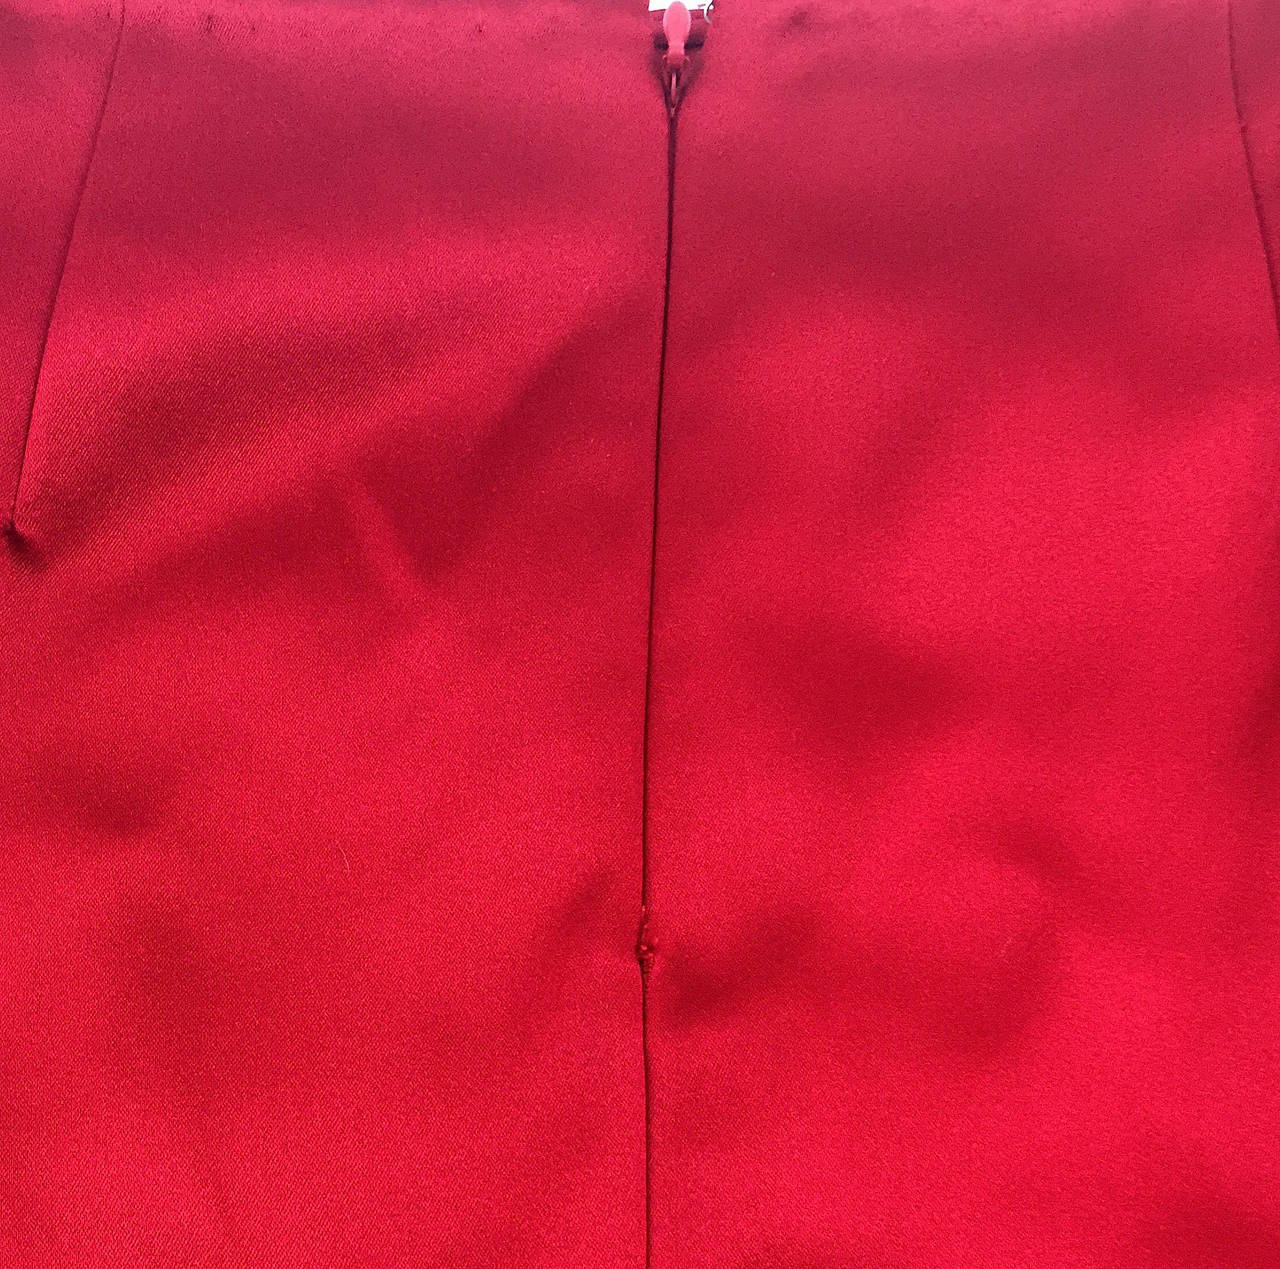 Prada Red Satin Runway Skirt with Flower Applique, IT 40 For Sale 3